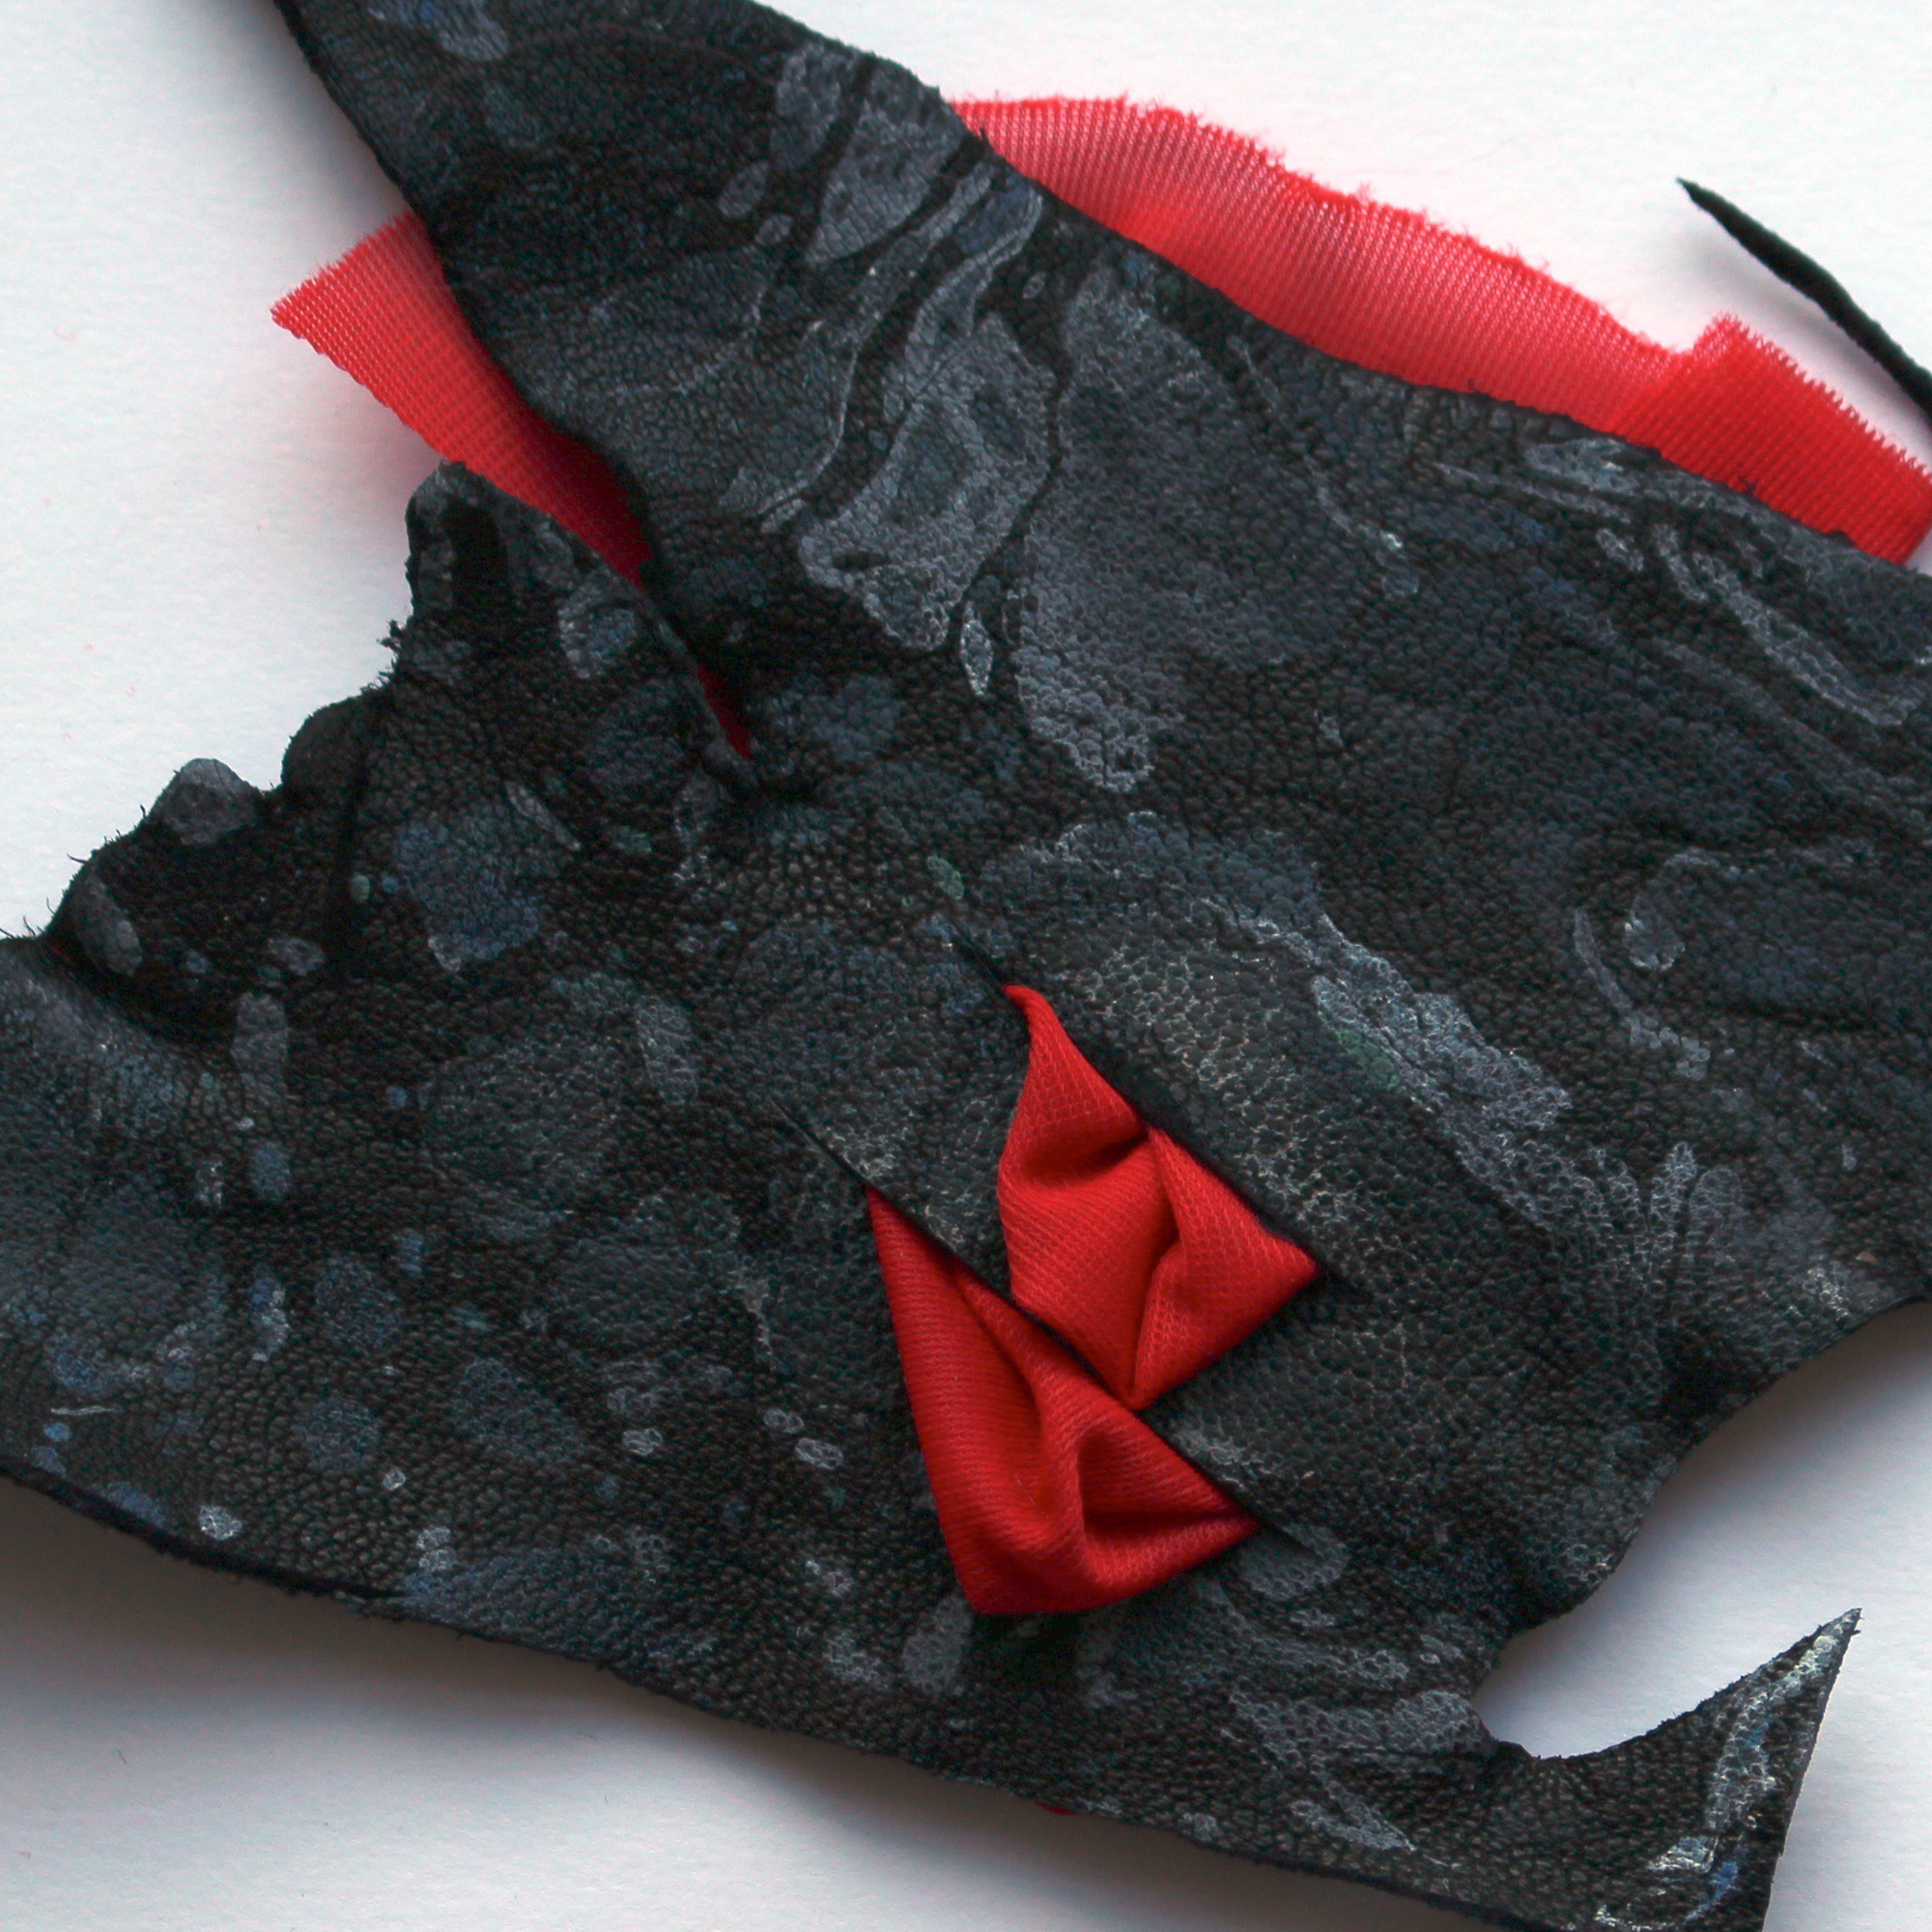 A photo of a material sample: a piece of black leather with white marble surface detailing and red fabric puffing out through three slashes.